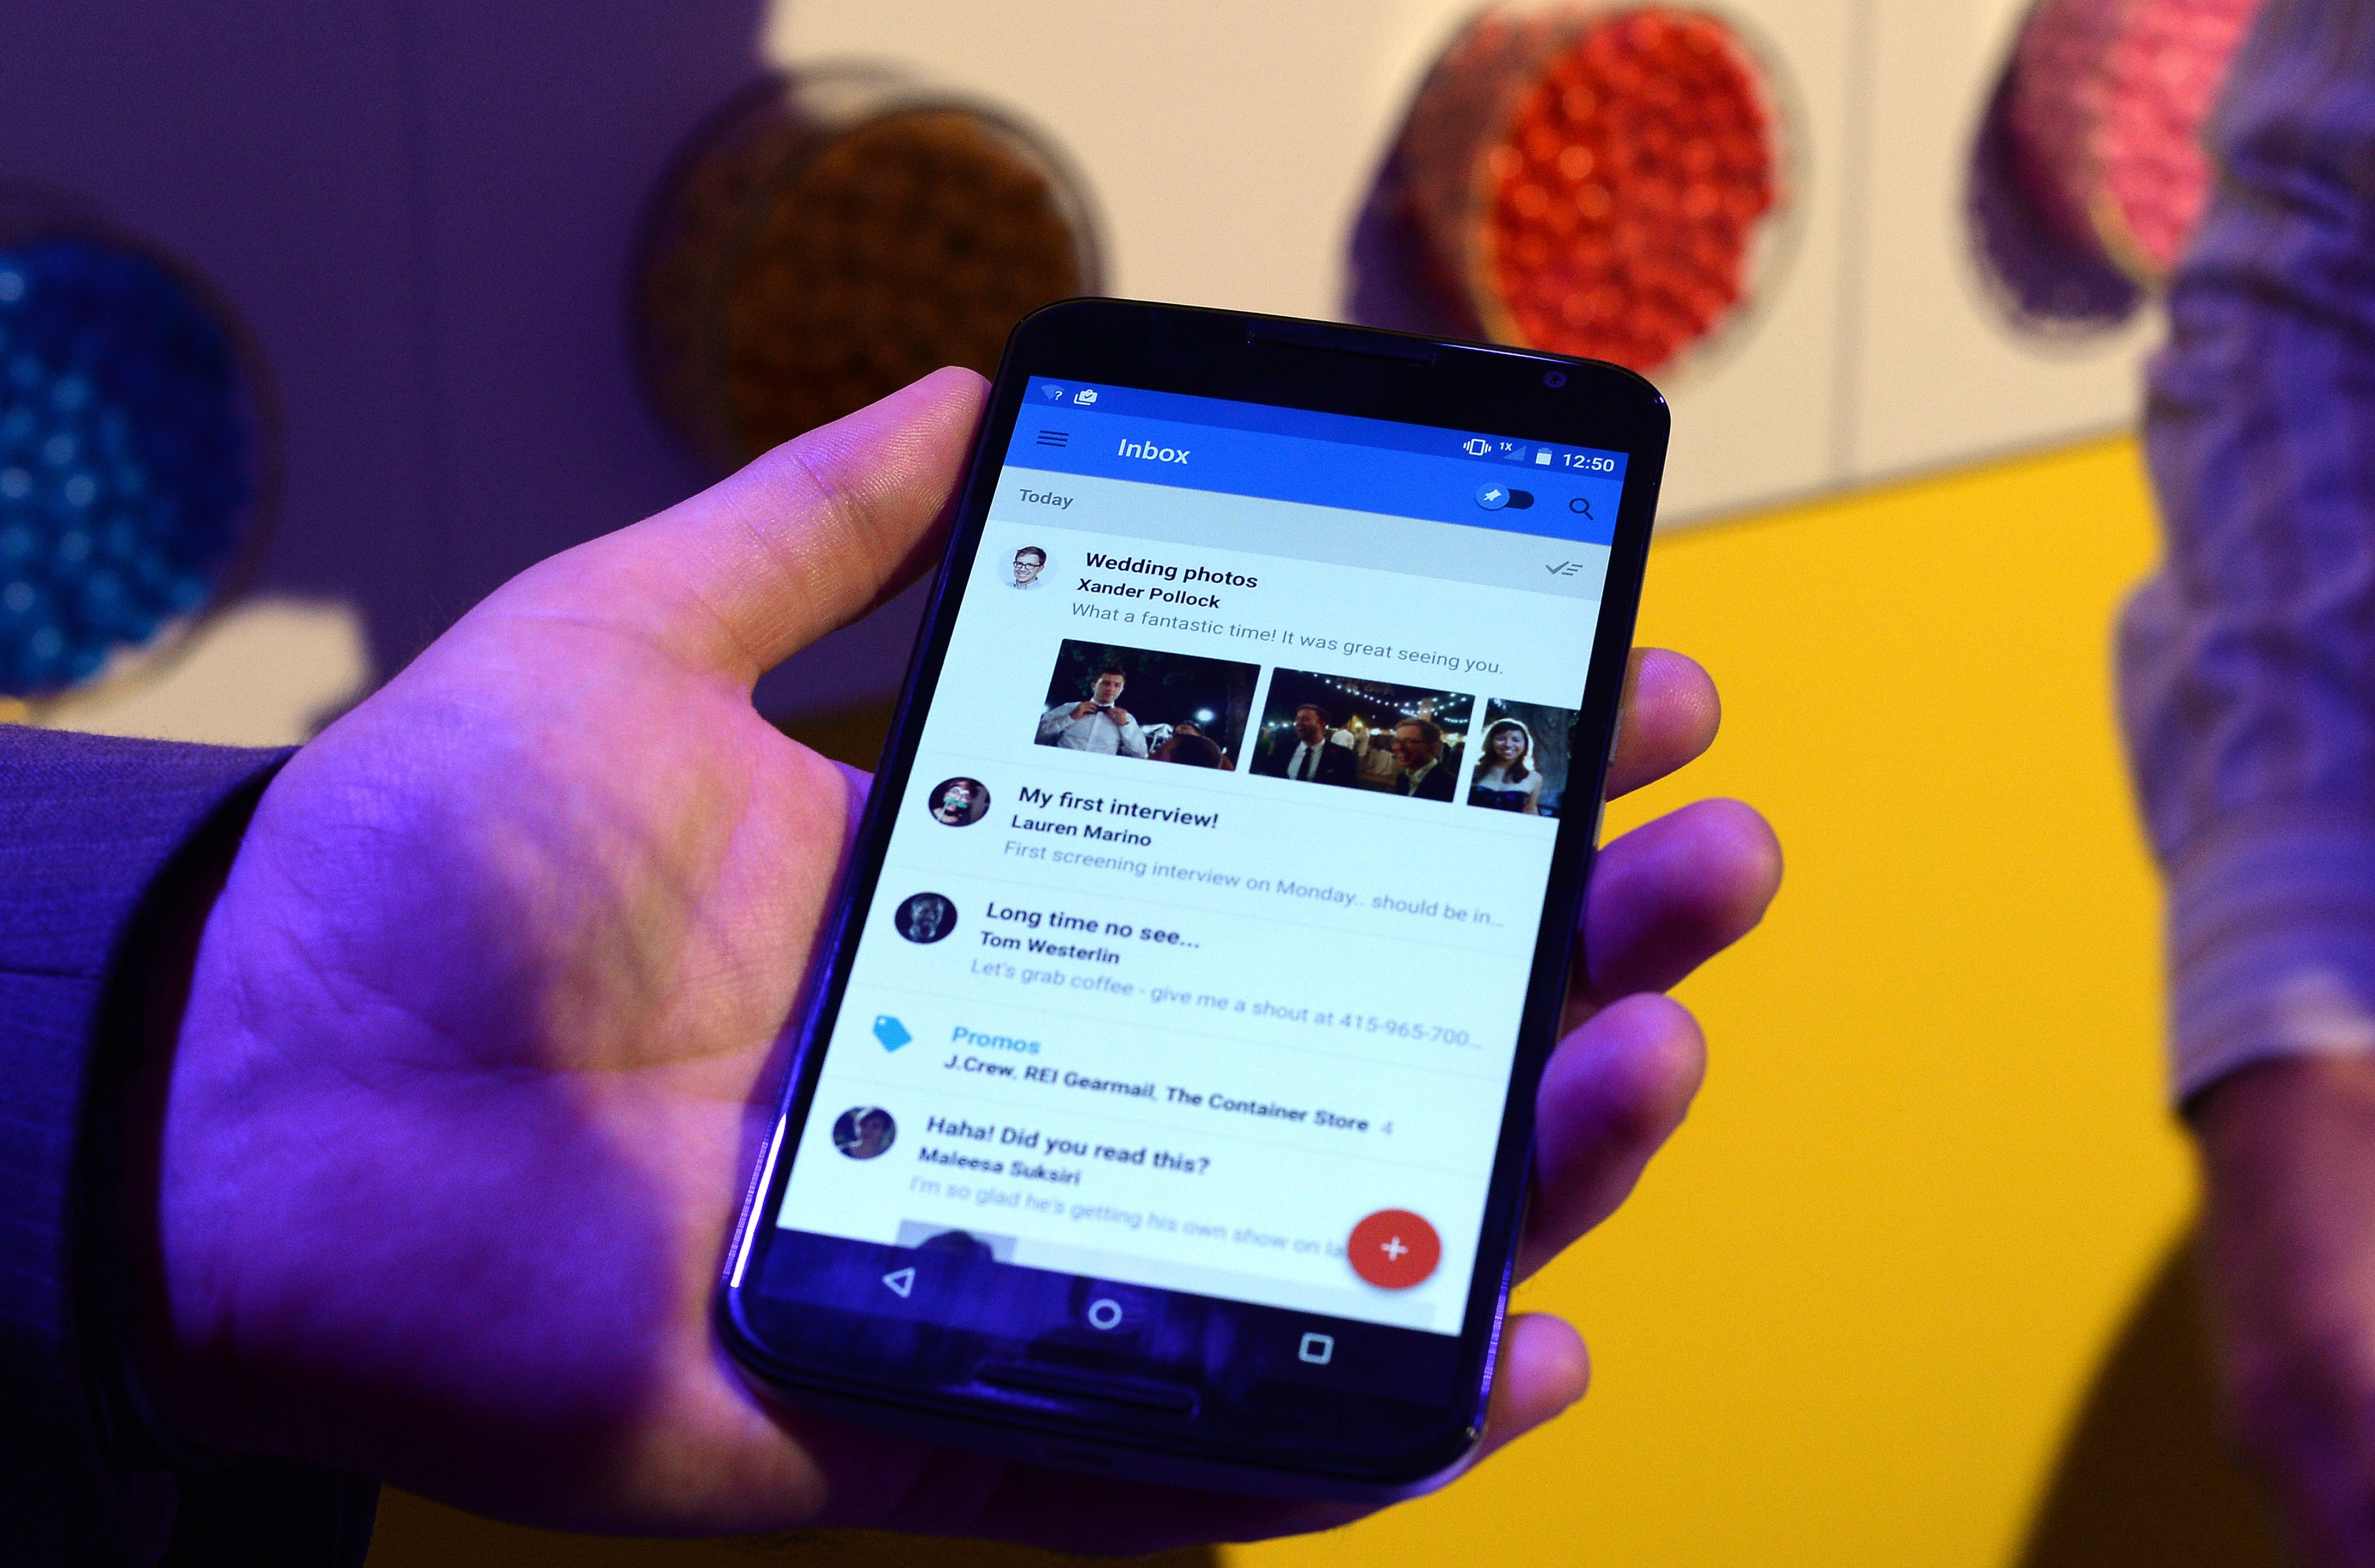 Google's lead designer for "Inbox by Gmail" Jason Cornwell shows the app's functionalities on a nexus 6 android phone during a media preview in New York on October 29, 2014. (Jewel Samad&mdash;AFP/Getty Images)